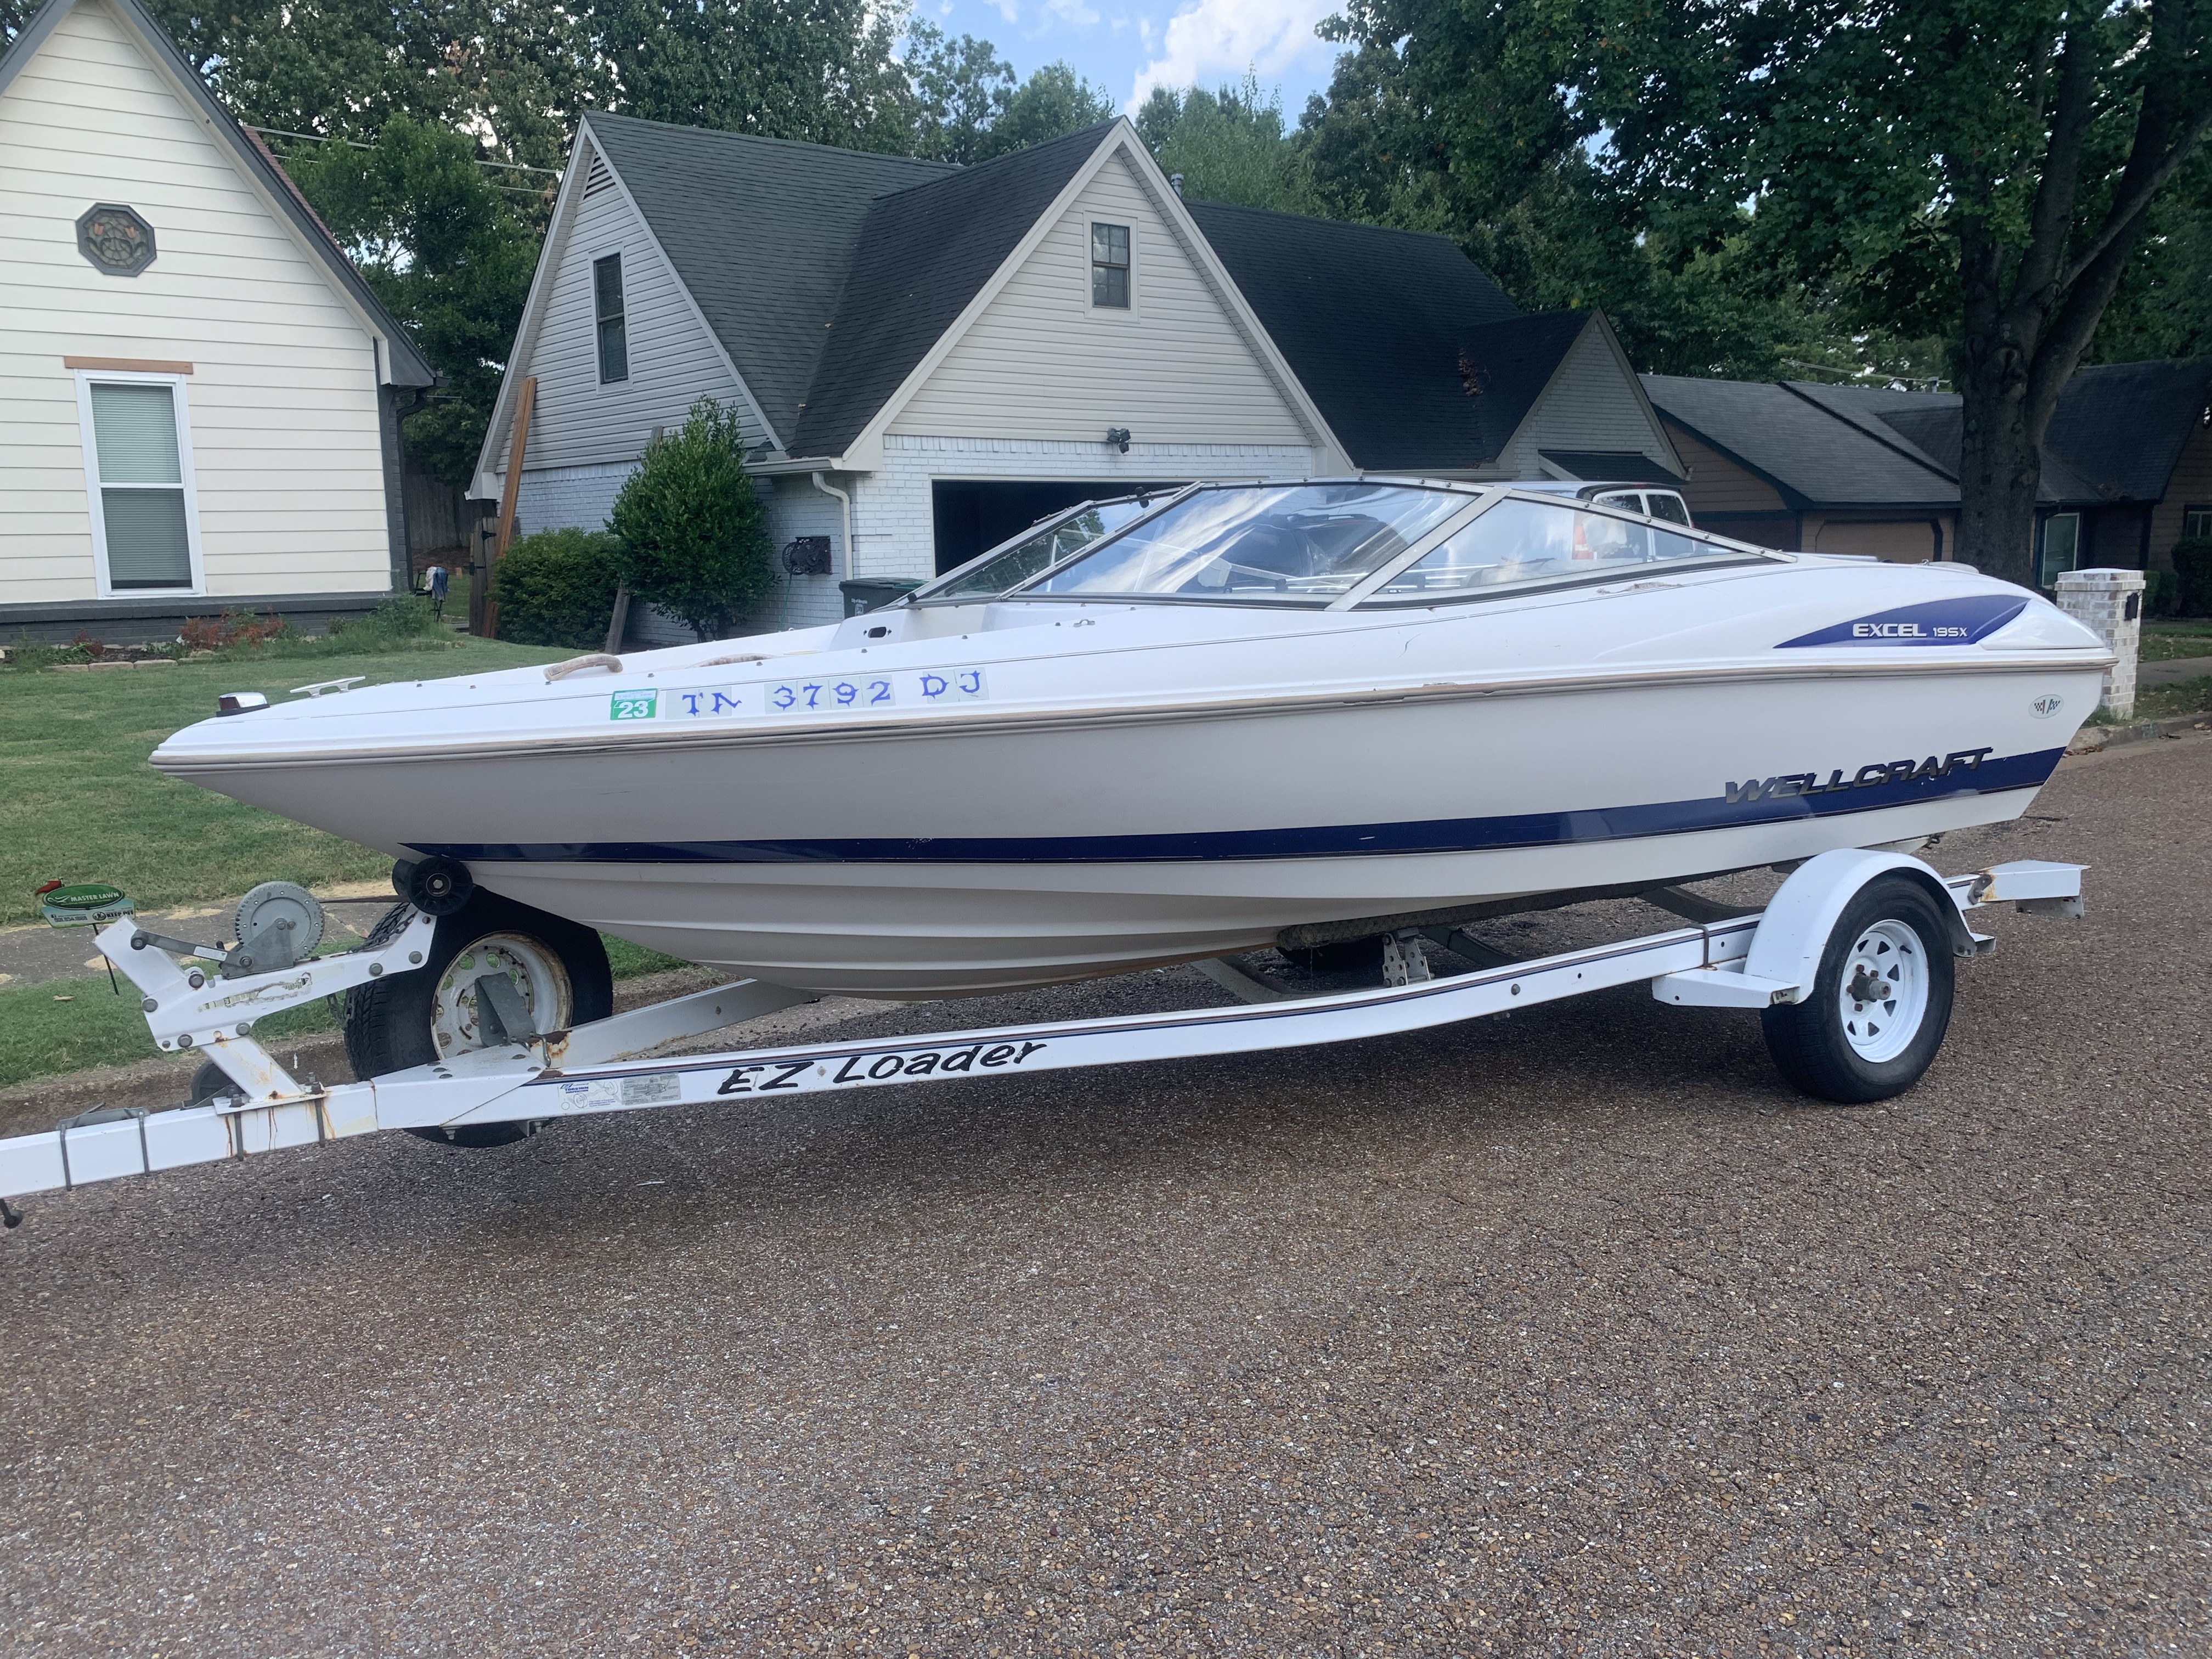 1996 Wellcraft Excel 19sx  Power boat for sale in Bartlett, TN - image 18 